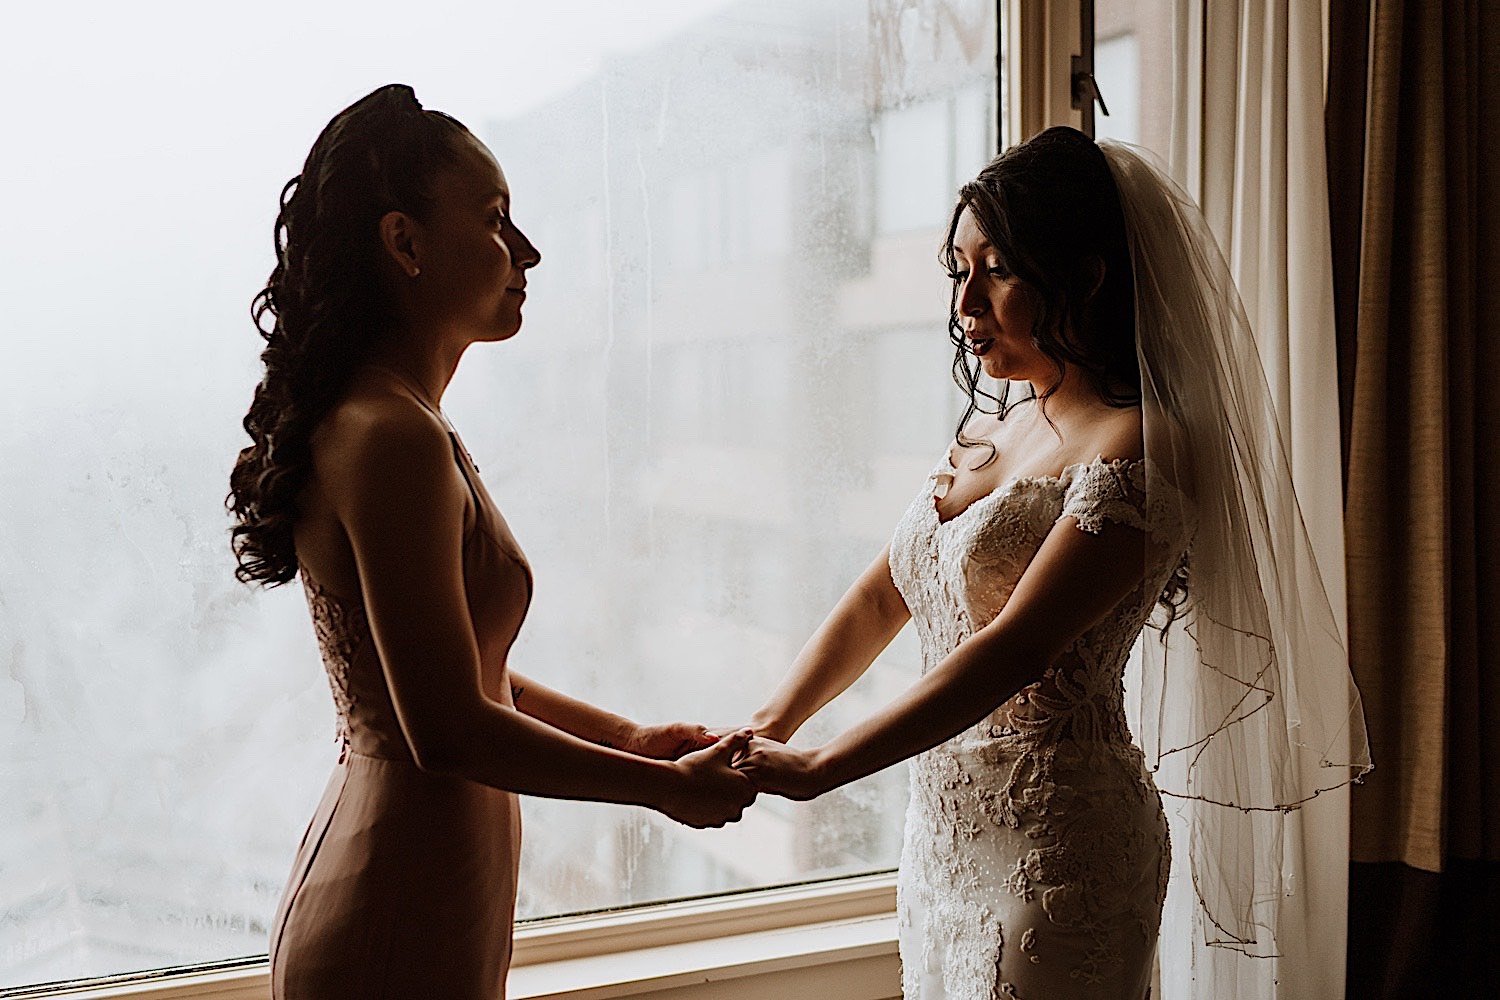 Bride and bridesmaid hold hands in front of a window before wedding